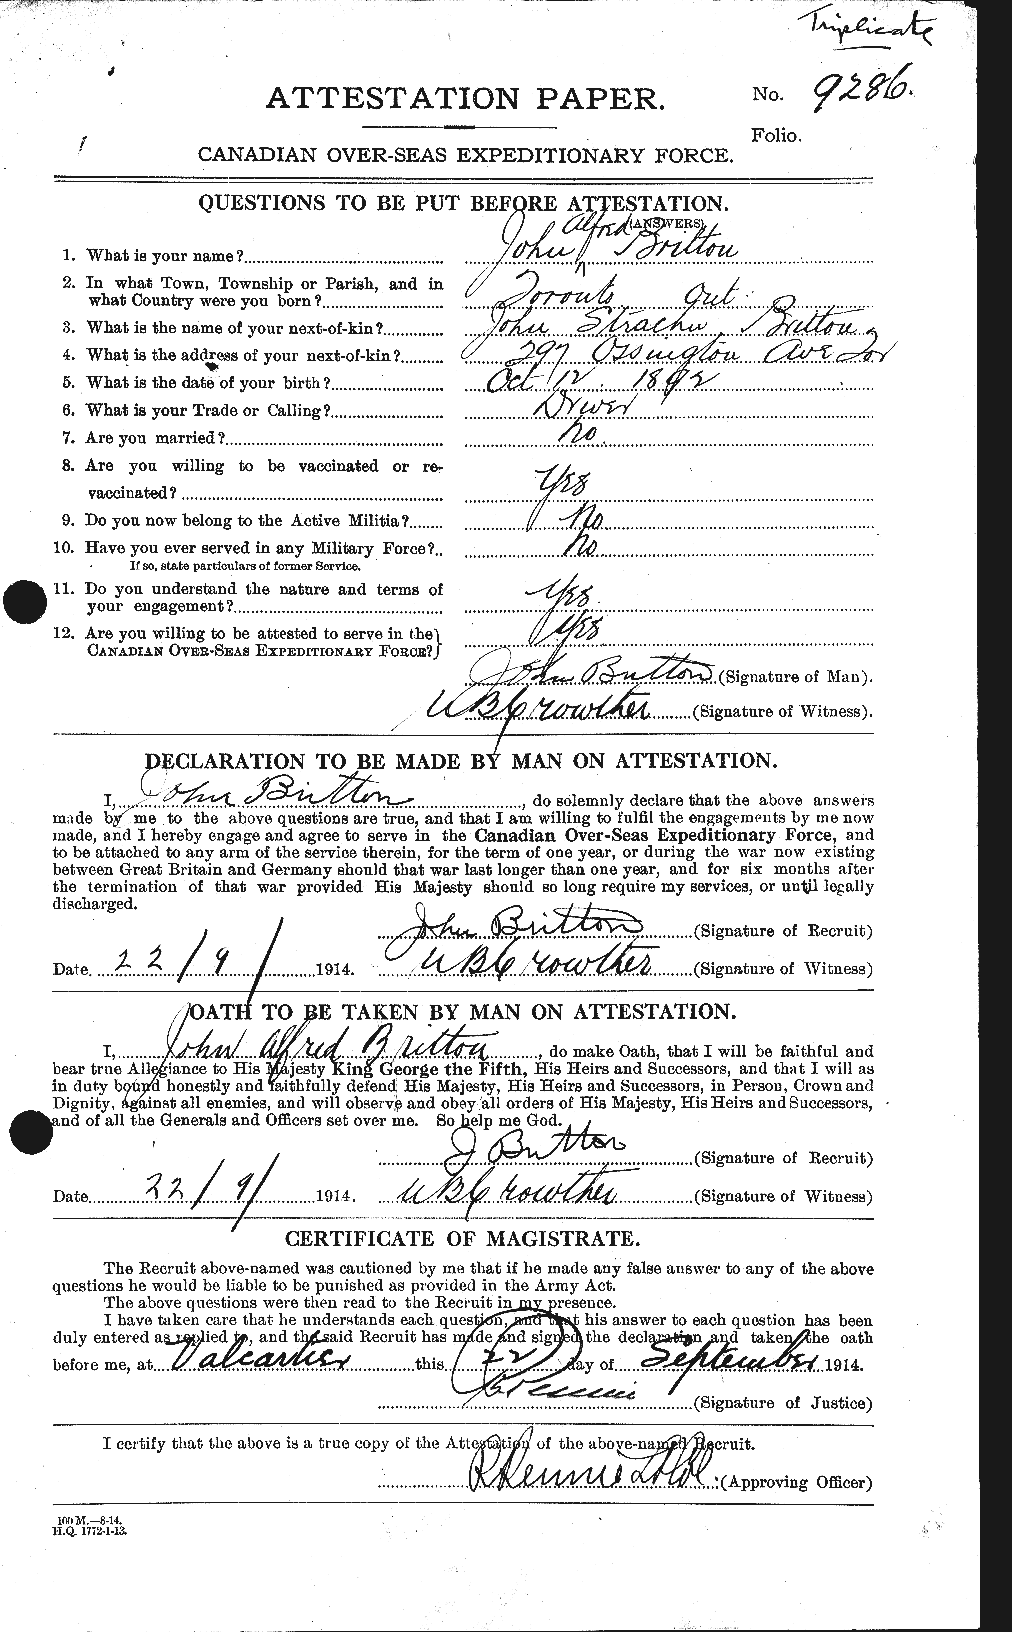 Personnel Records of the First World War - CEF 261946a